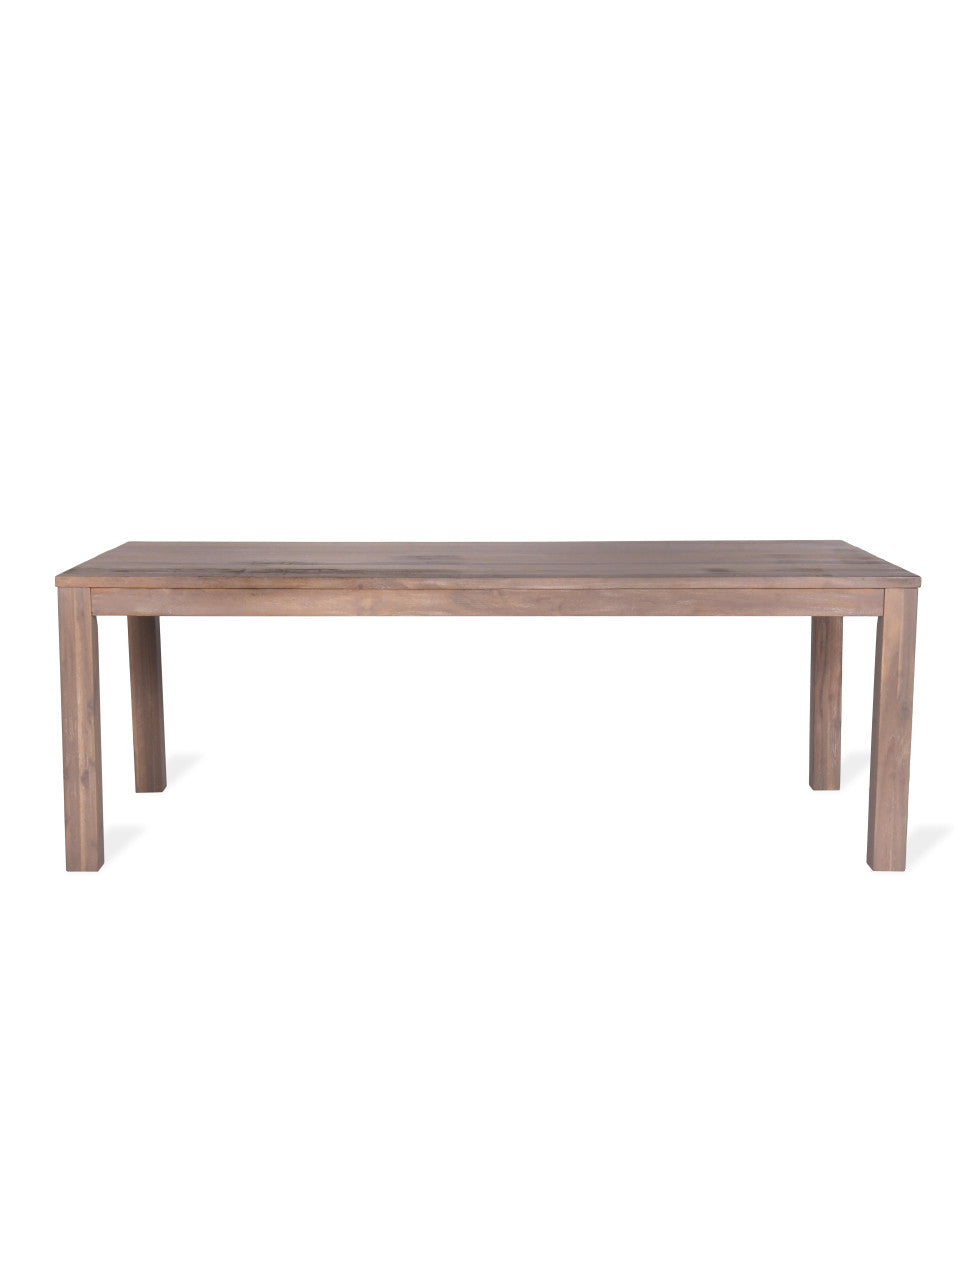 Porthallow Dining Table